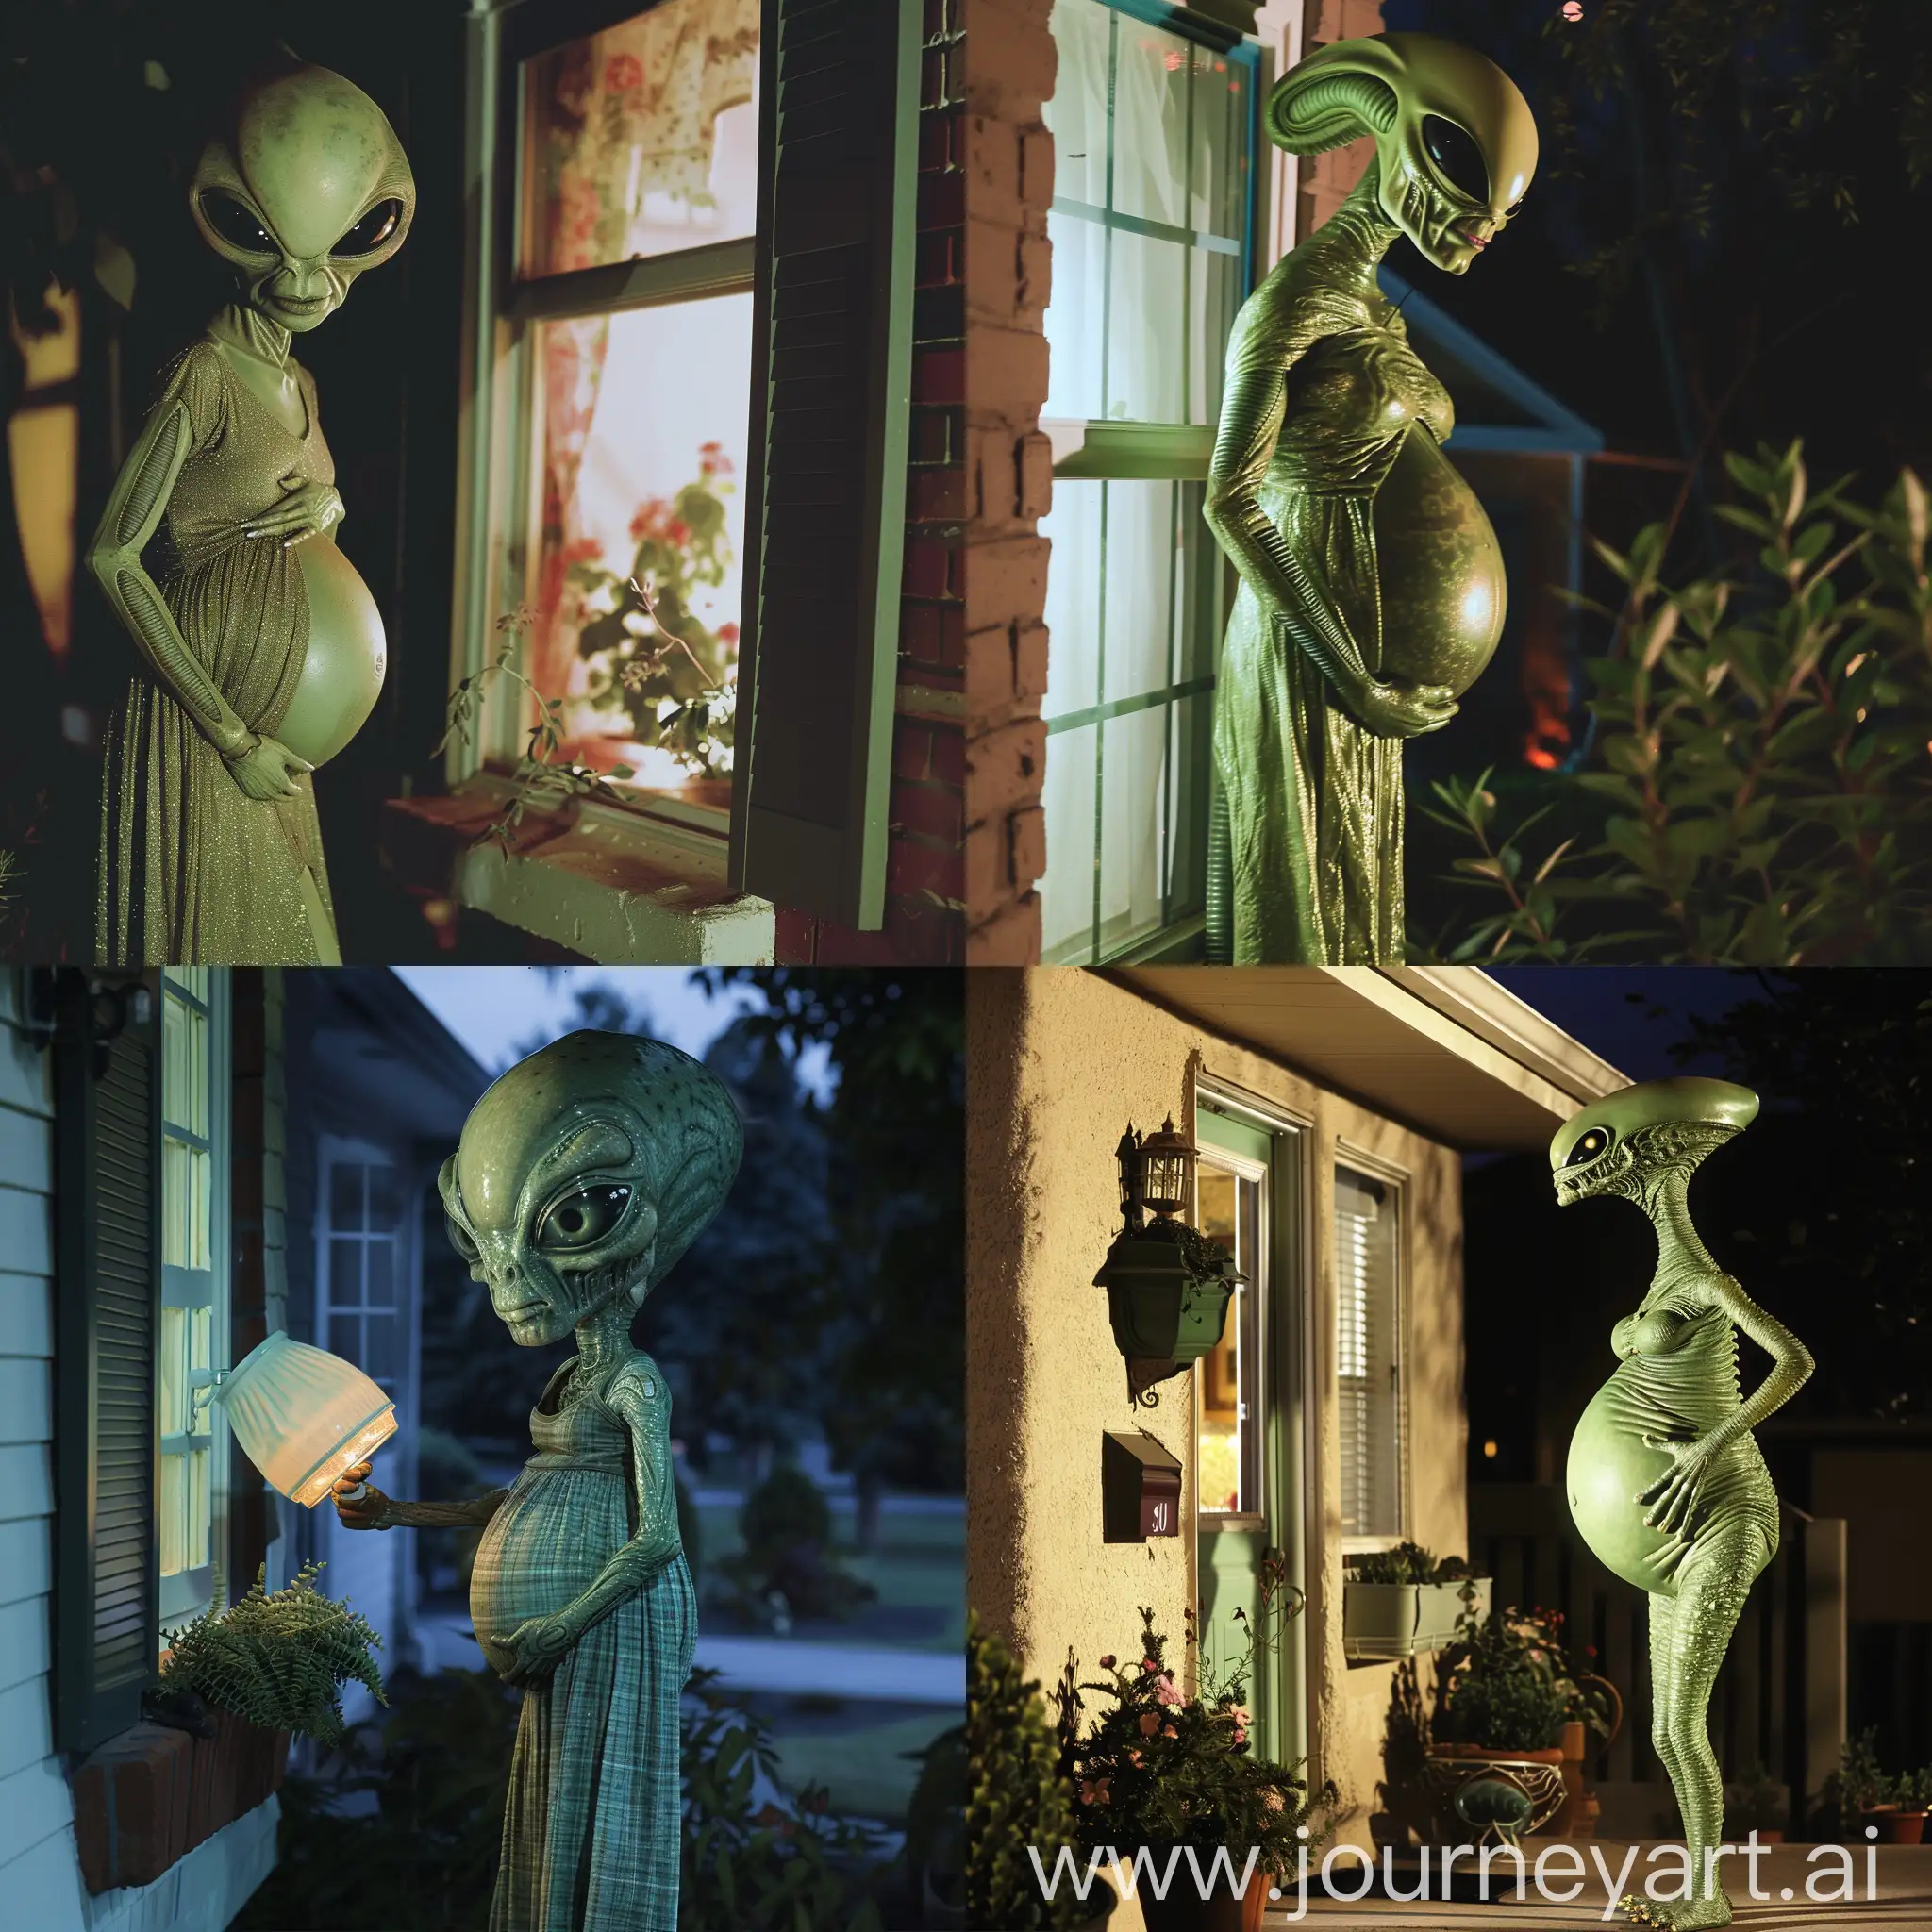 A female green alien, 7 feet tall, Very Pregnant, The alien's pregnant belly is very large. The alien is standing around outside someone's house, peeking into the person's window. At night.